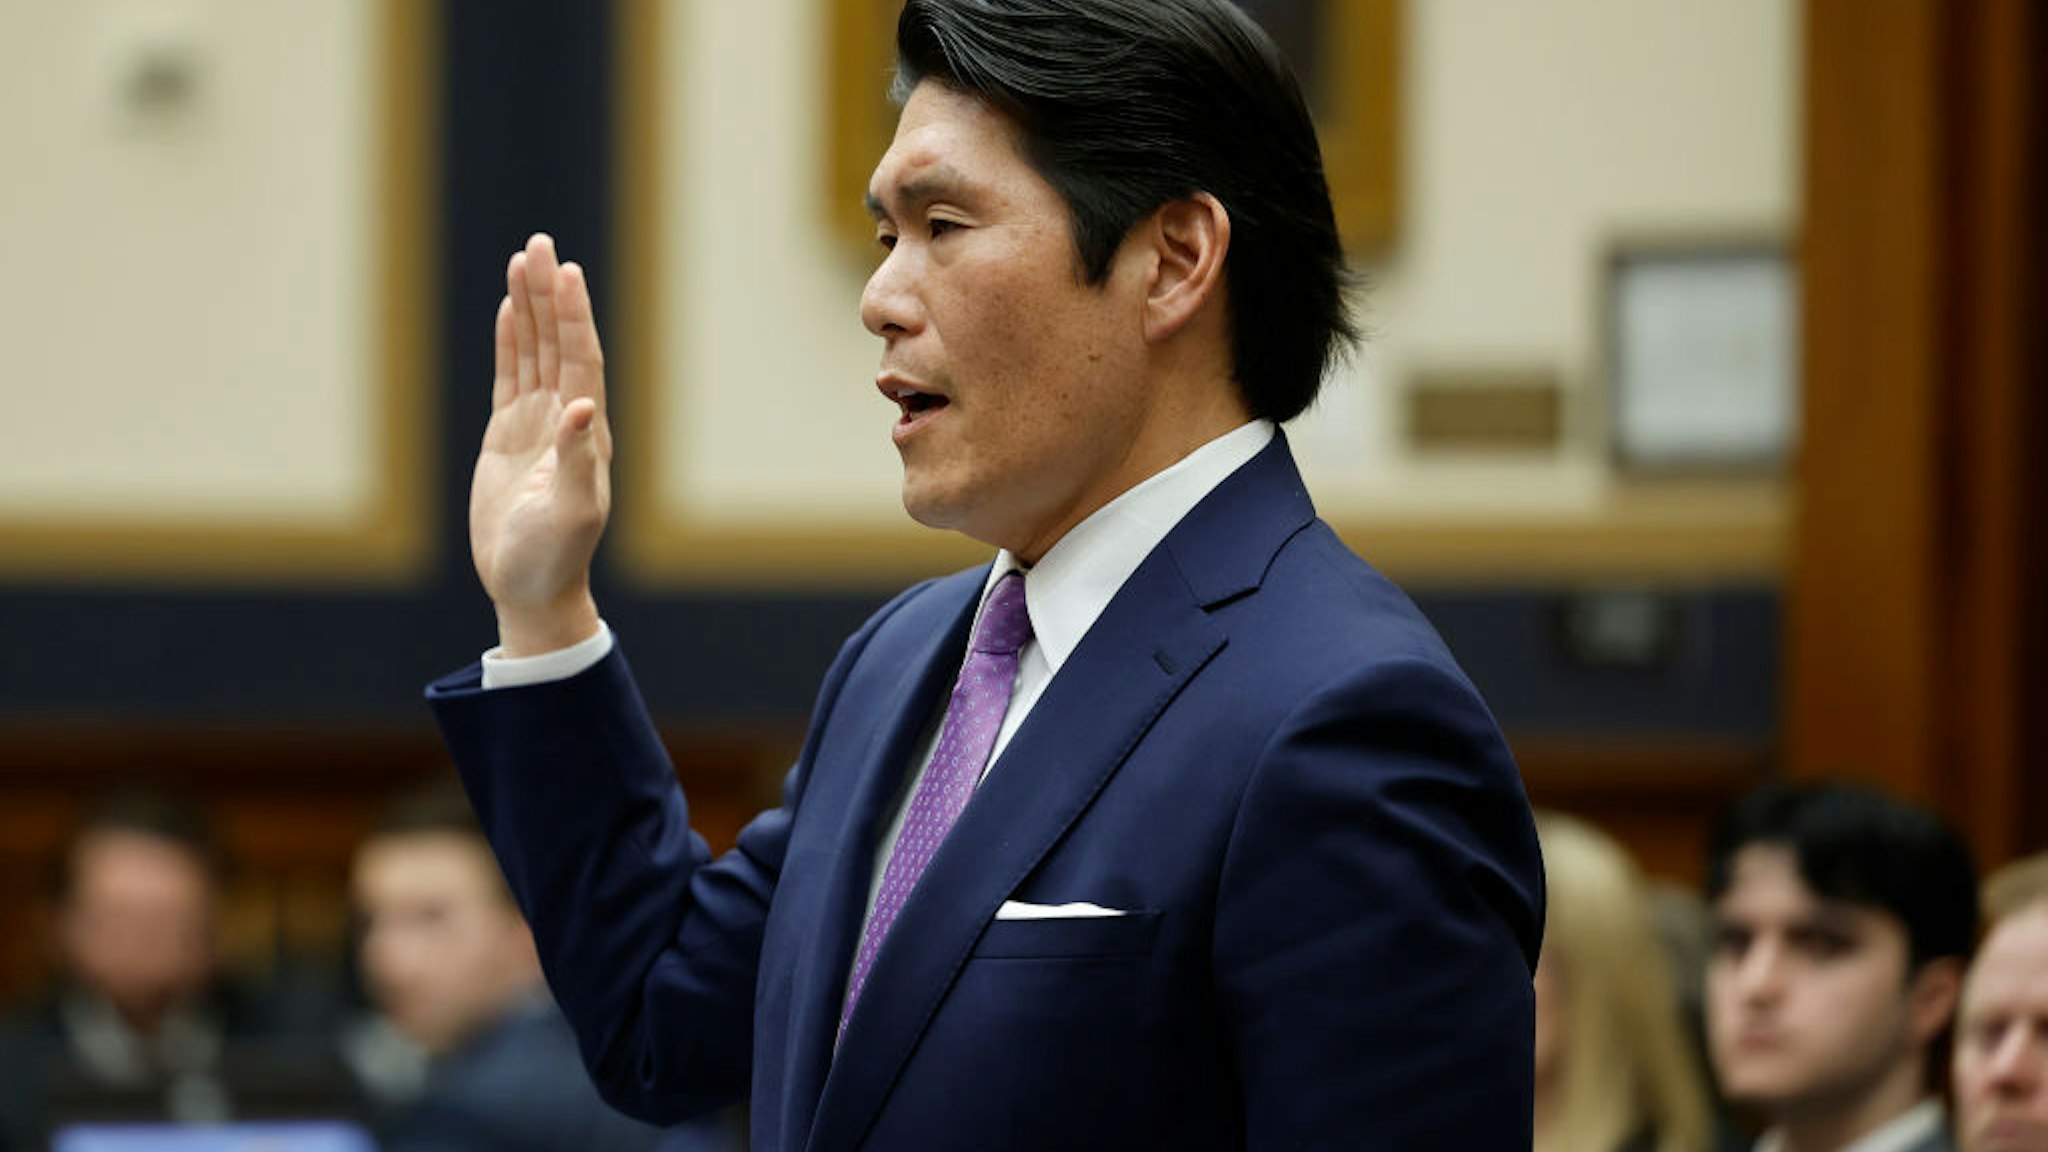 WASHINGTON, DC - MARCH 12: Former Special Counsel Robert K. Hur is sworn in as he testifies before the House Judiciary Committee on March 12, 2024 in Washington, DC. Hur investigated U.S. President Joe Biden’s mishandling of classified documents and published a final report with contentious conclusions about Biden’s memory. (Photo by Chip Somodevilla/Getty Images)